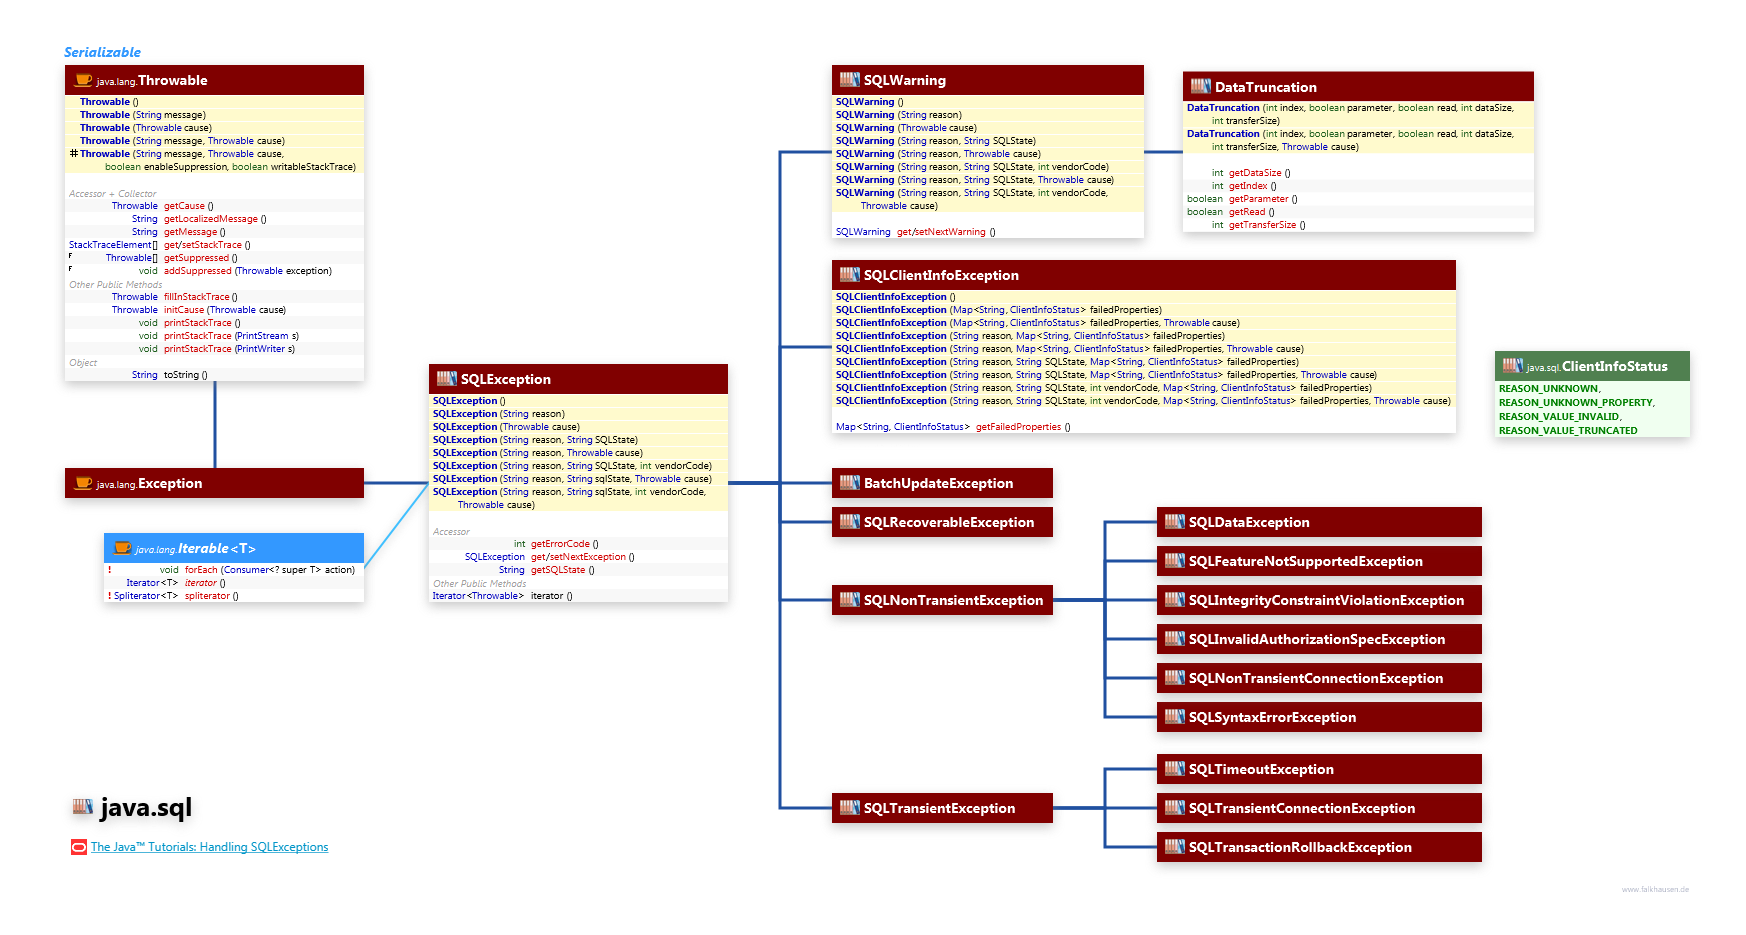 java.sql Exceptions class diagram and api documentation for Java 8